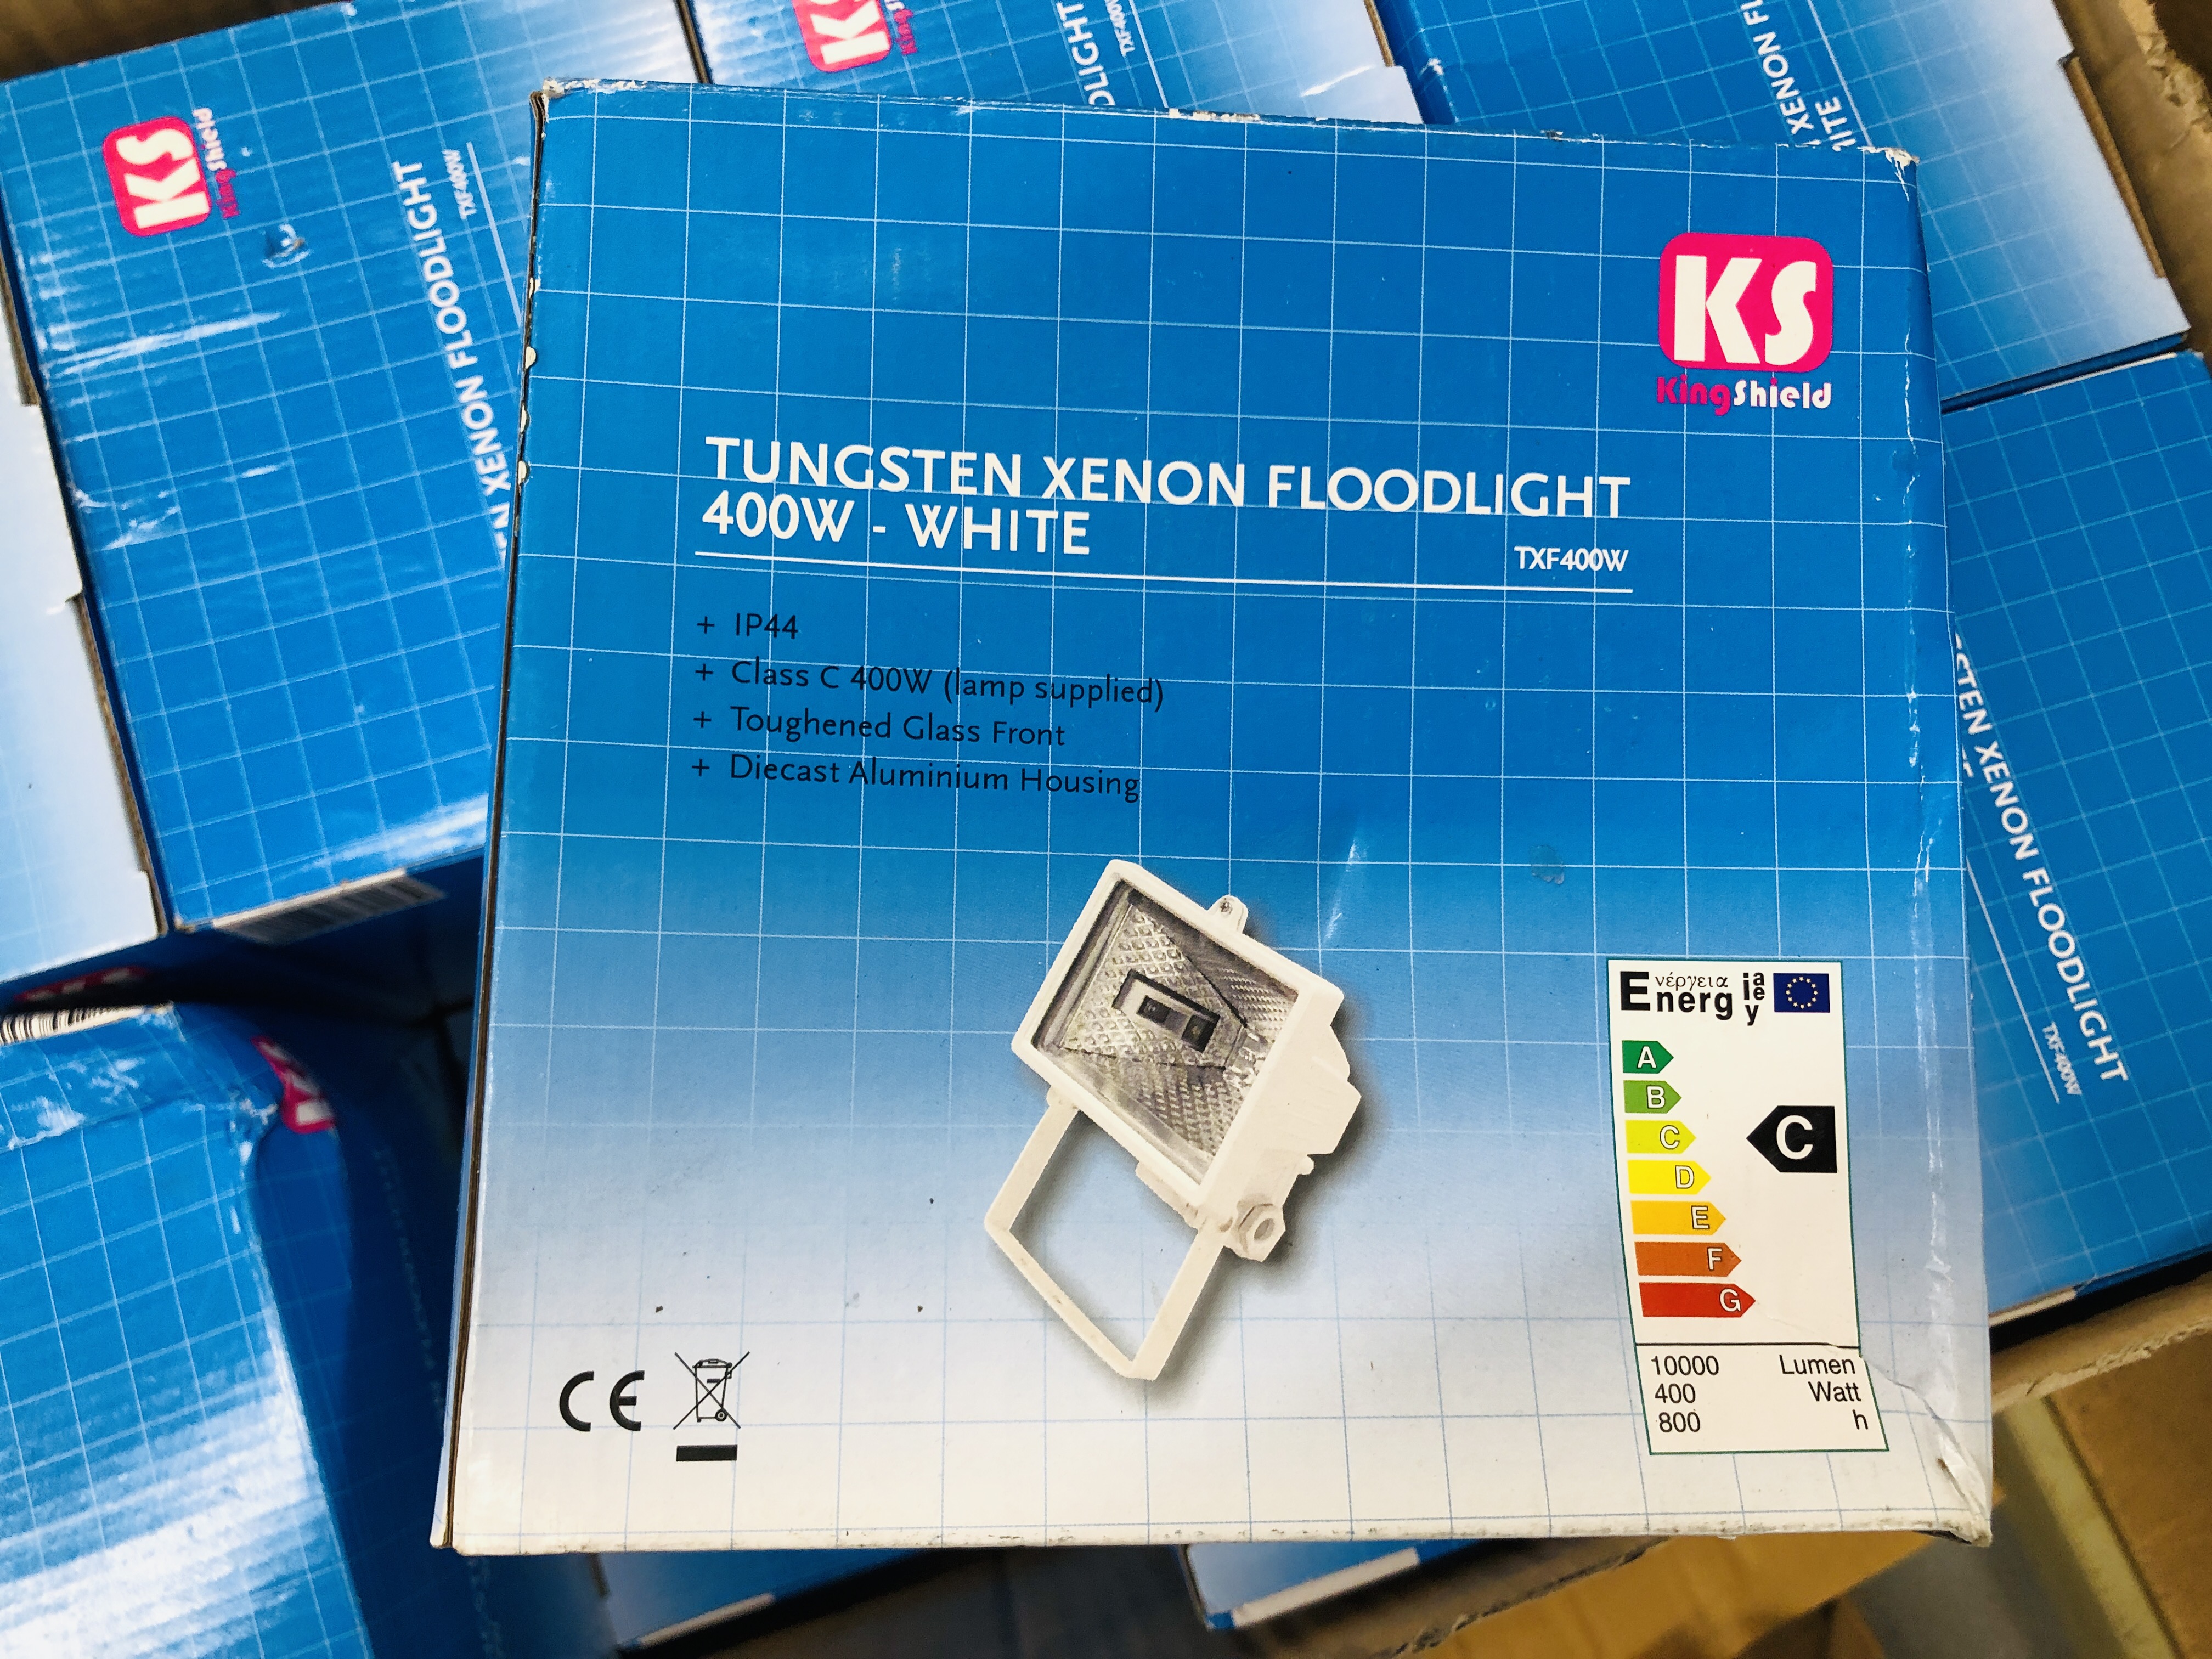 16 X KING SHIELD TUNGSTEN XENON FLOODLIGHTS 400W - WHITE (BOXED AS NEW) - Image 2 of 2